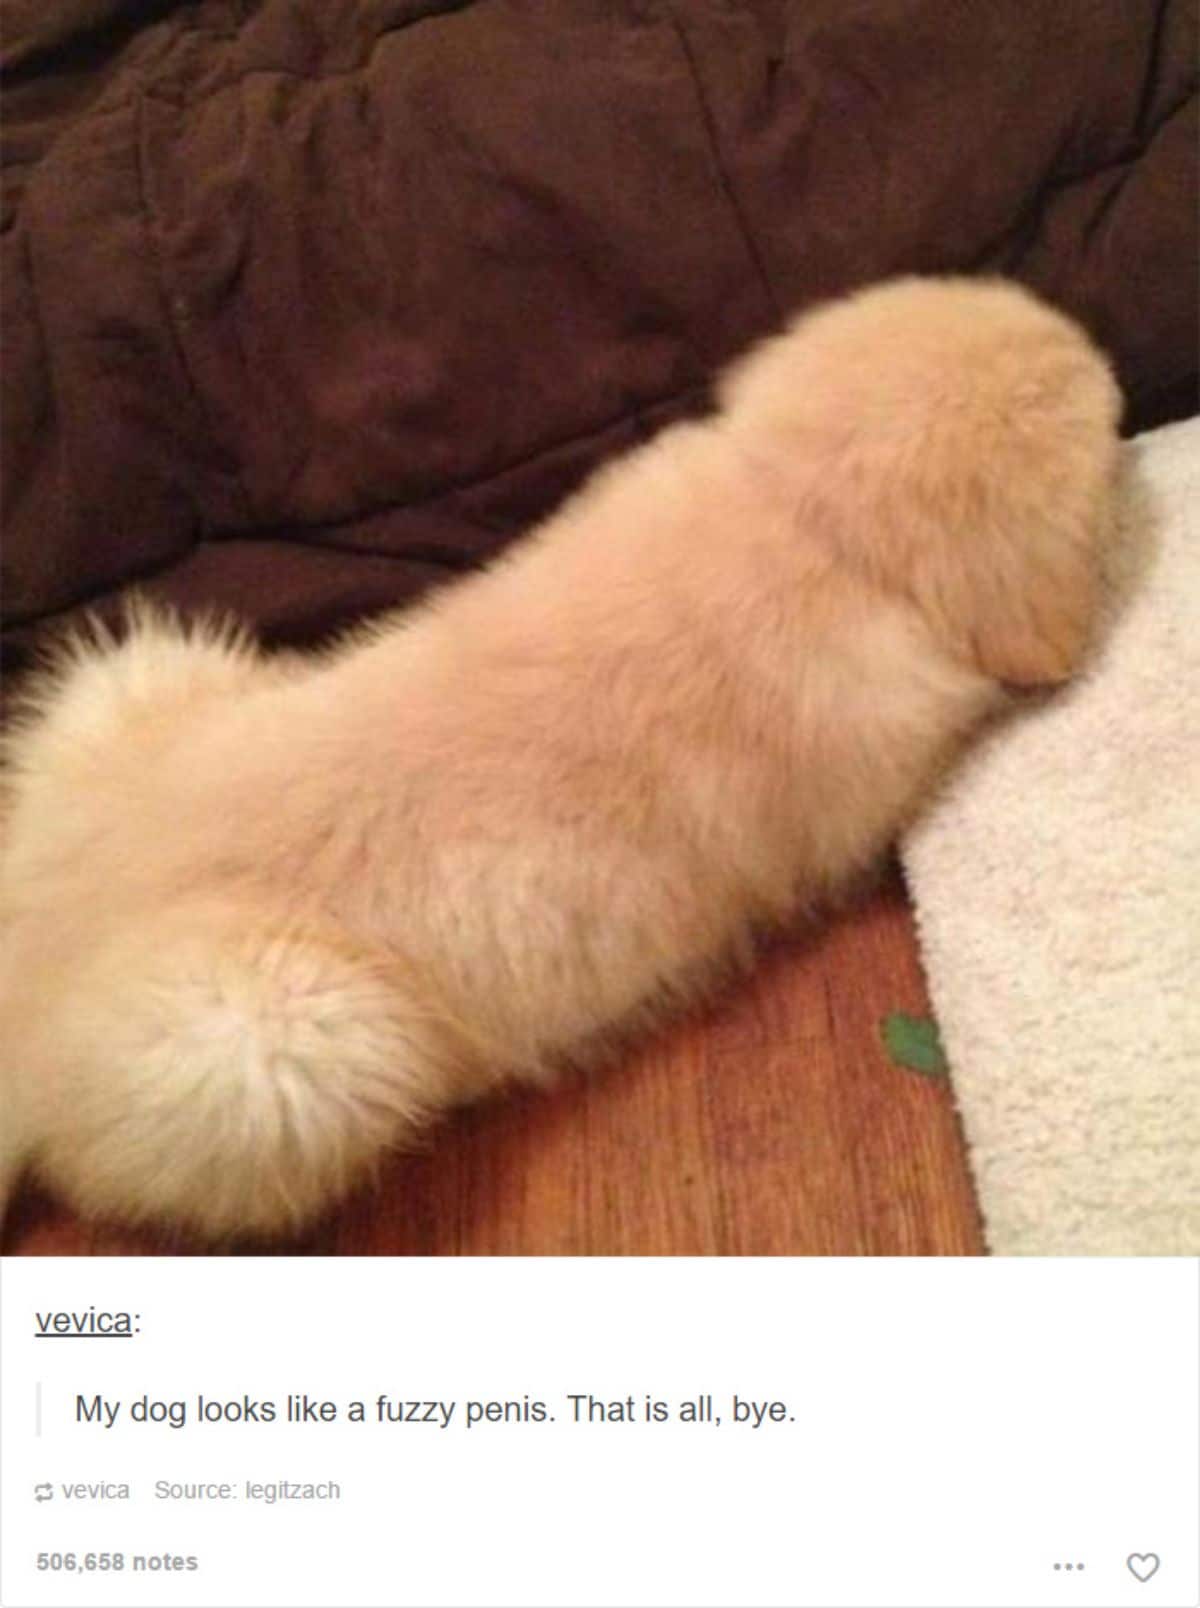 tumblr post of back of a golden retriever puppy with caption saying the dog looks like a fuzzy penis